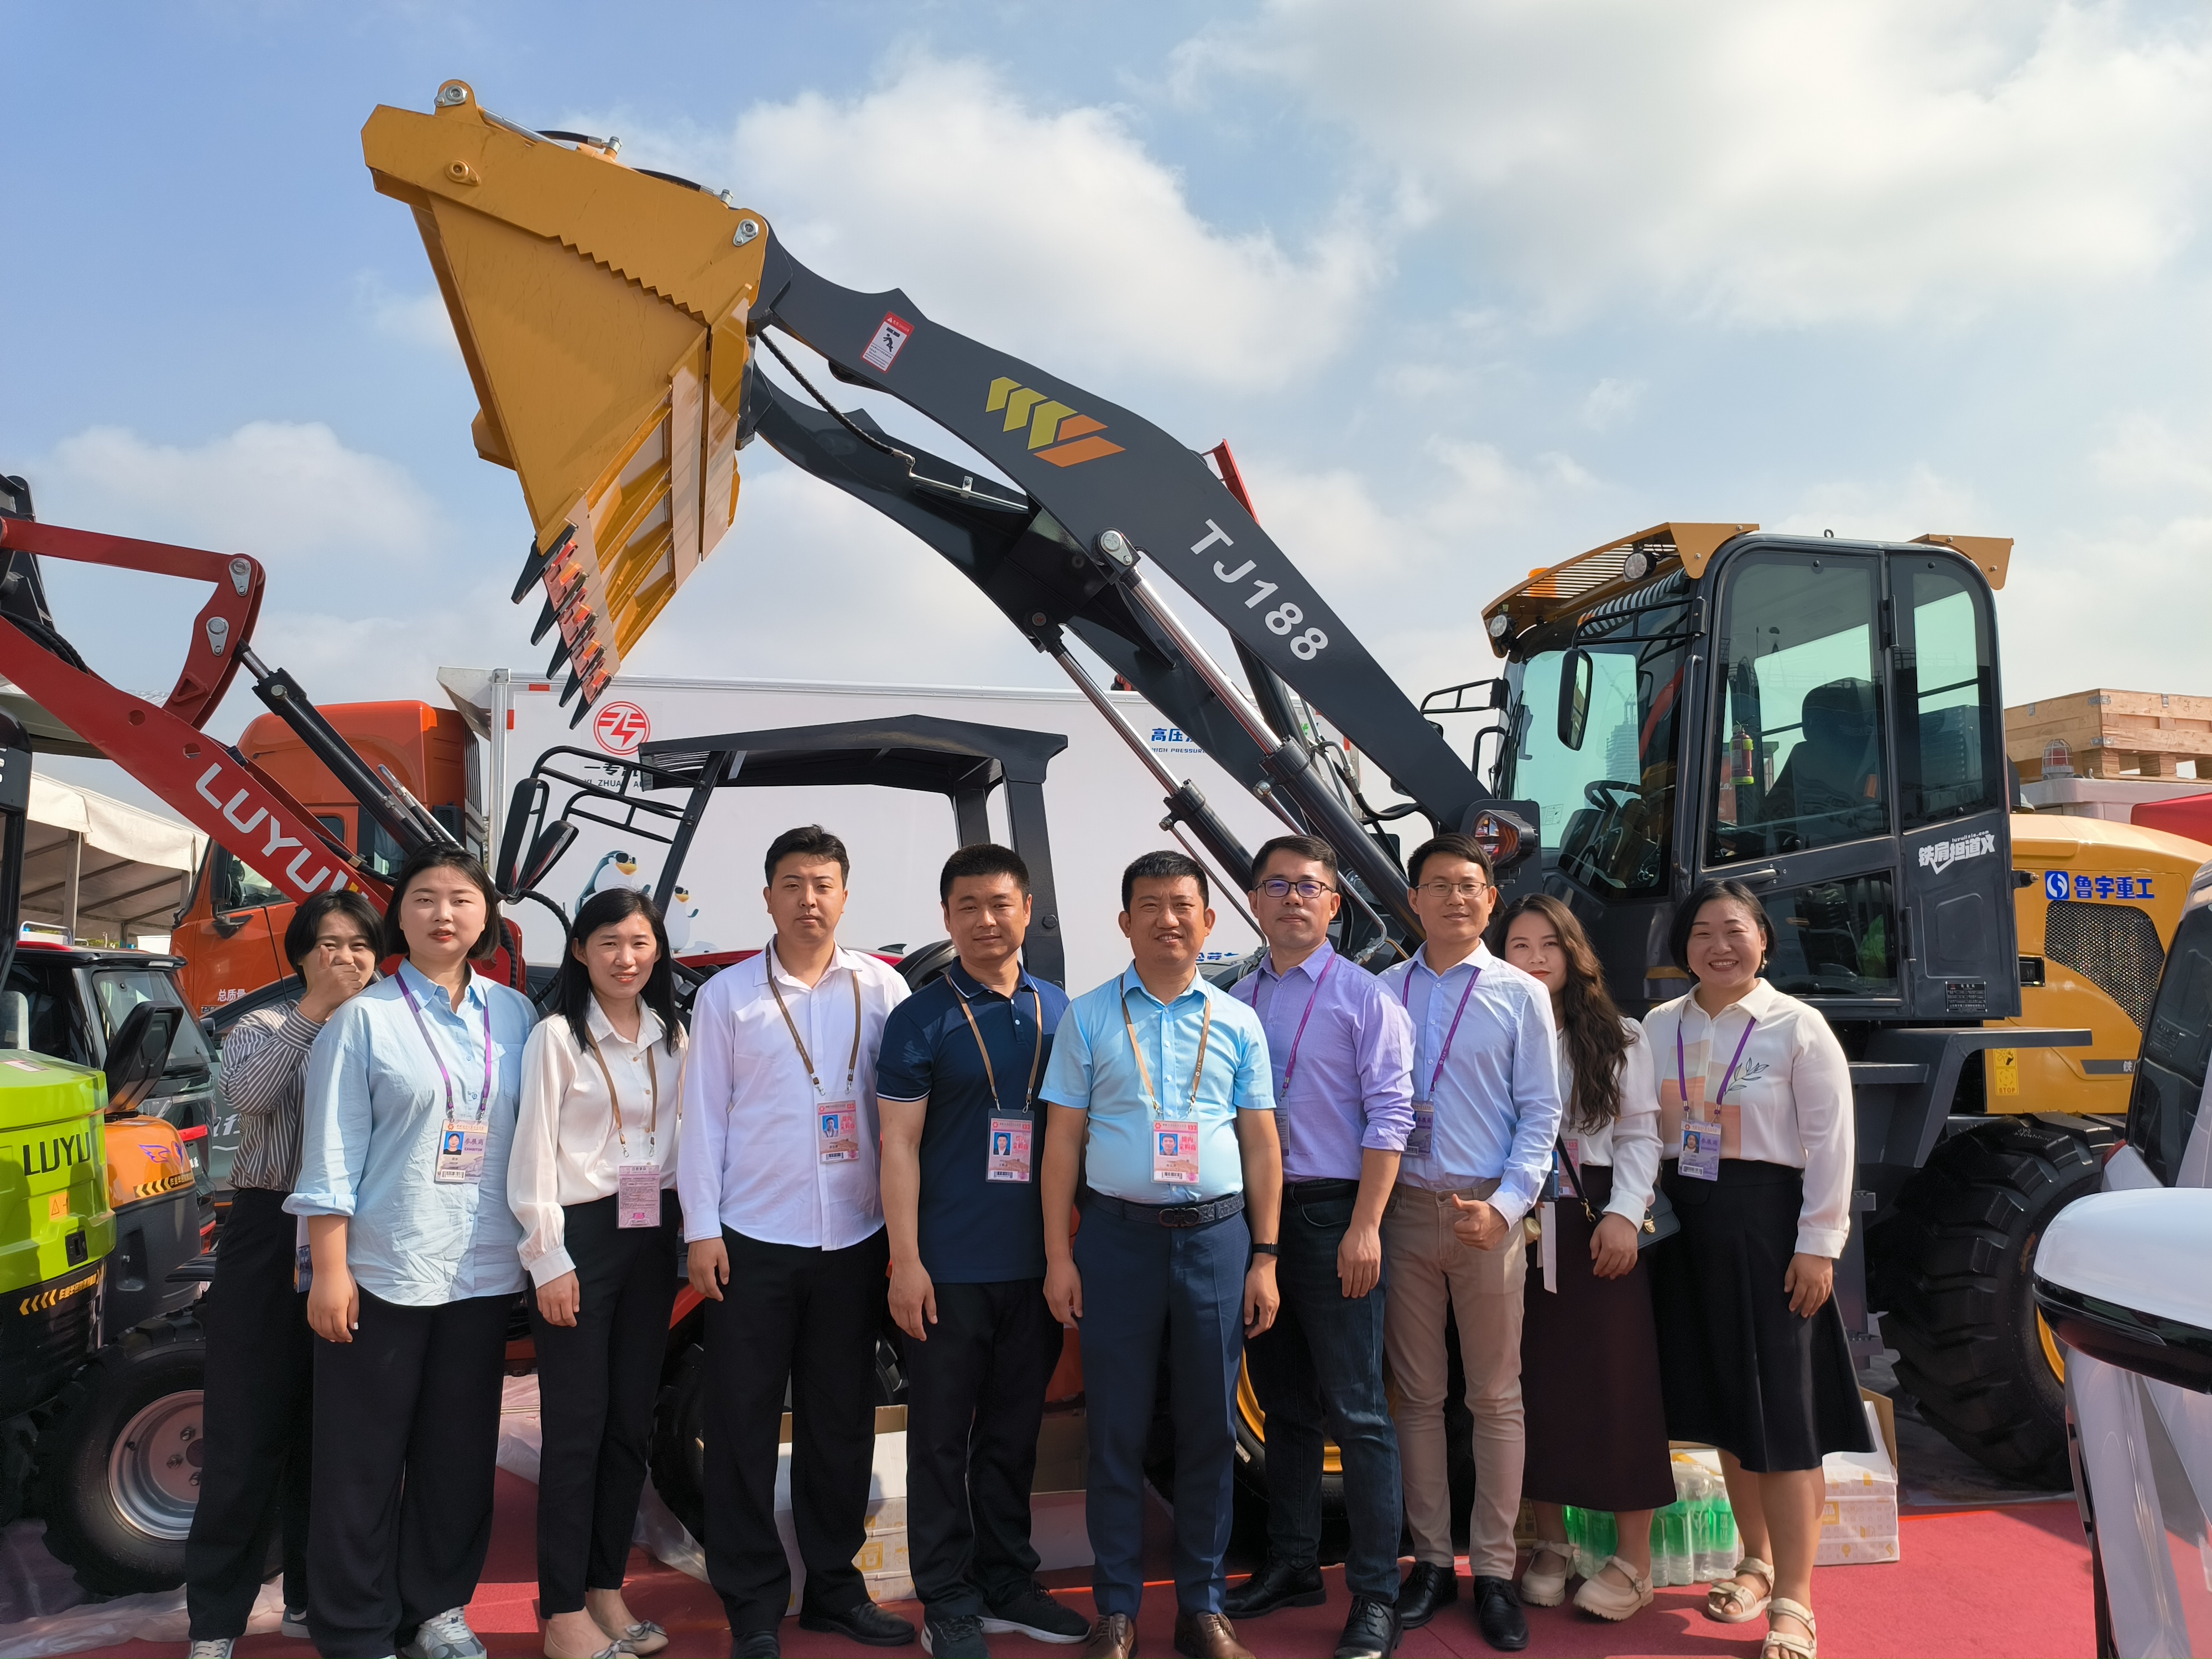 The 133 spring Canton Fair LUYU machinery deeply impressed the visitors